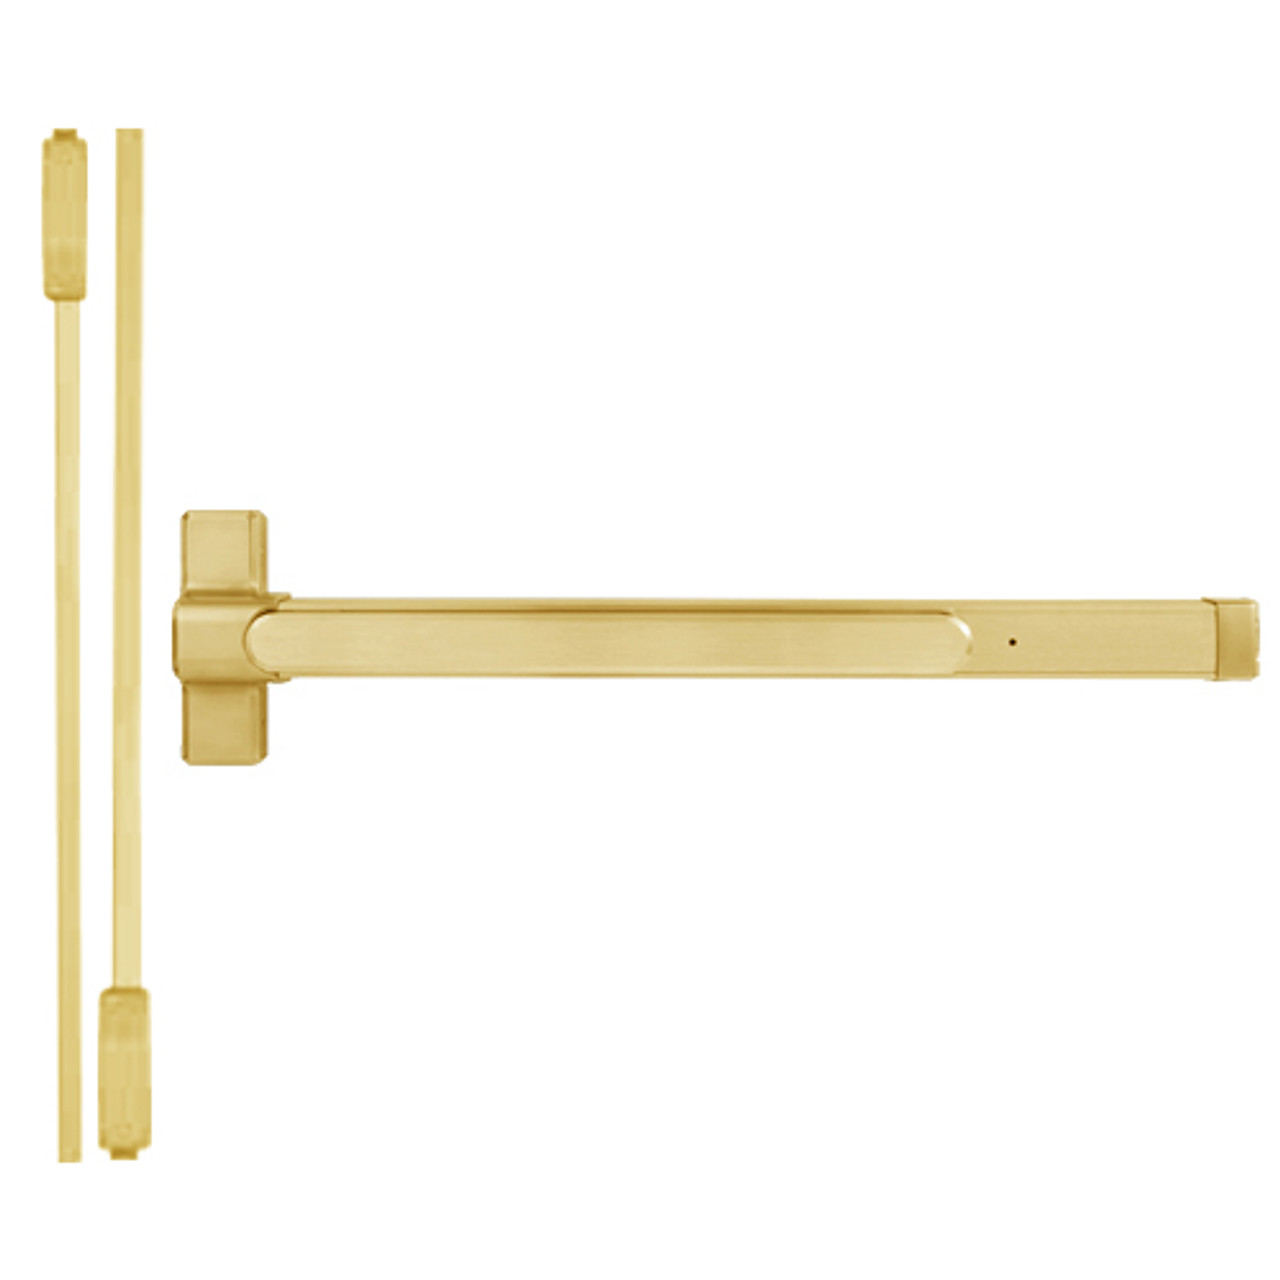 QED116X-48-8-605 Stanley QED100 Series Heavy Duty Surface Vertical Rod Fire Rated Exit Device in Bright Brass Finish